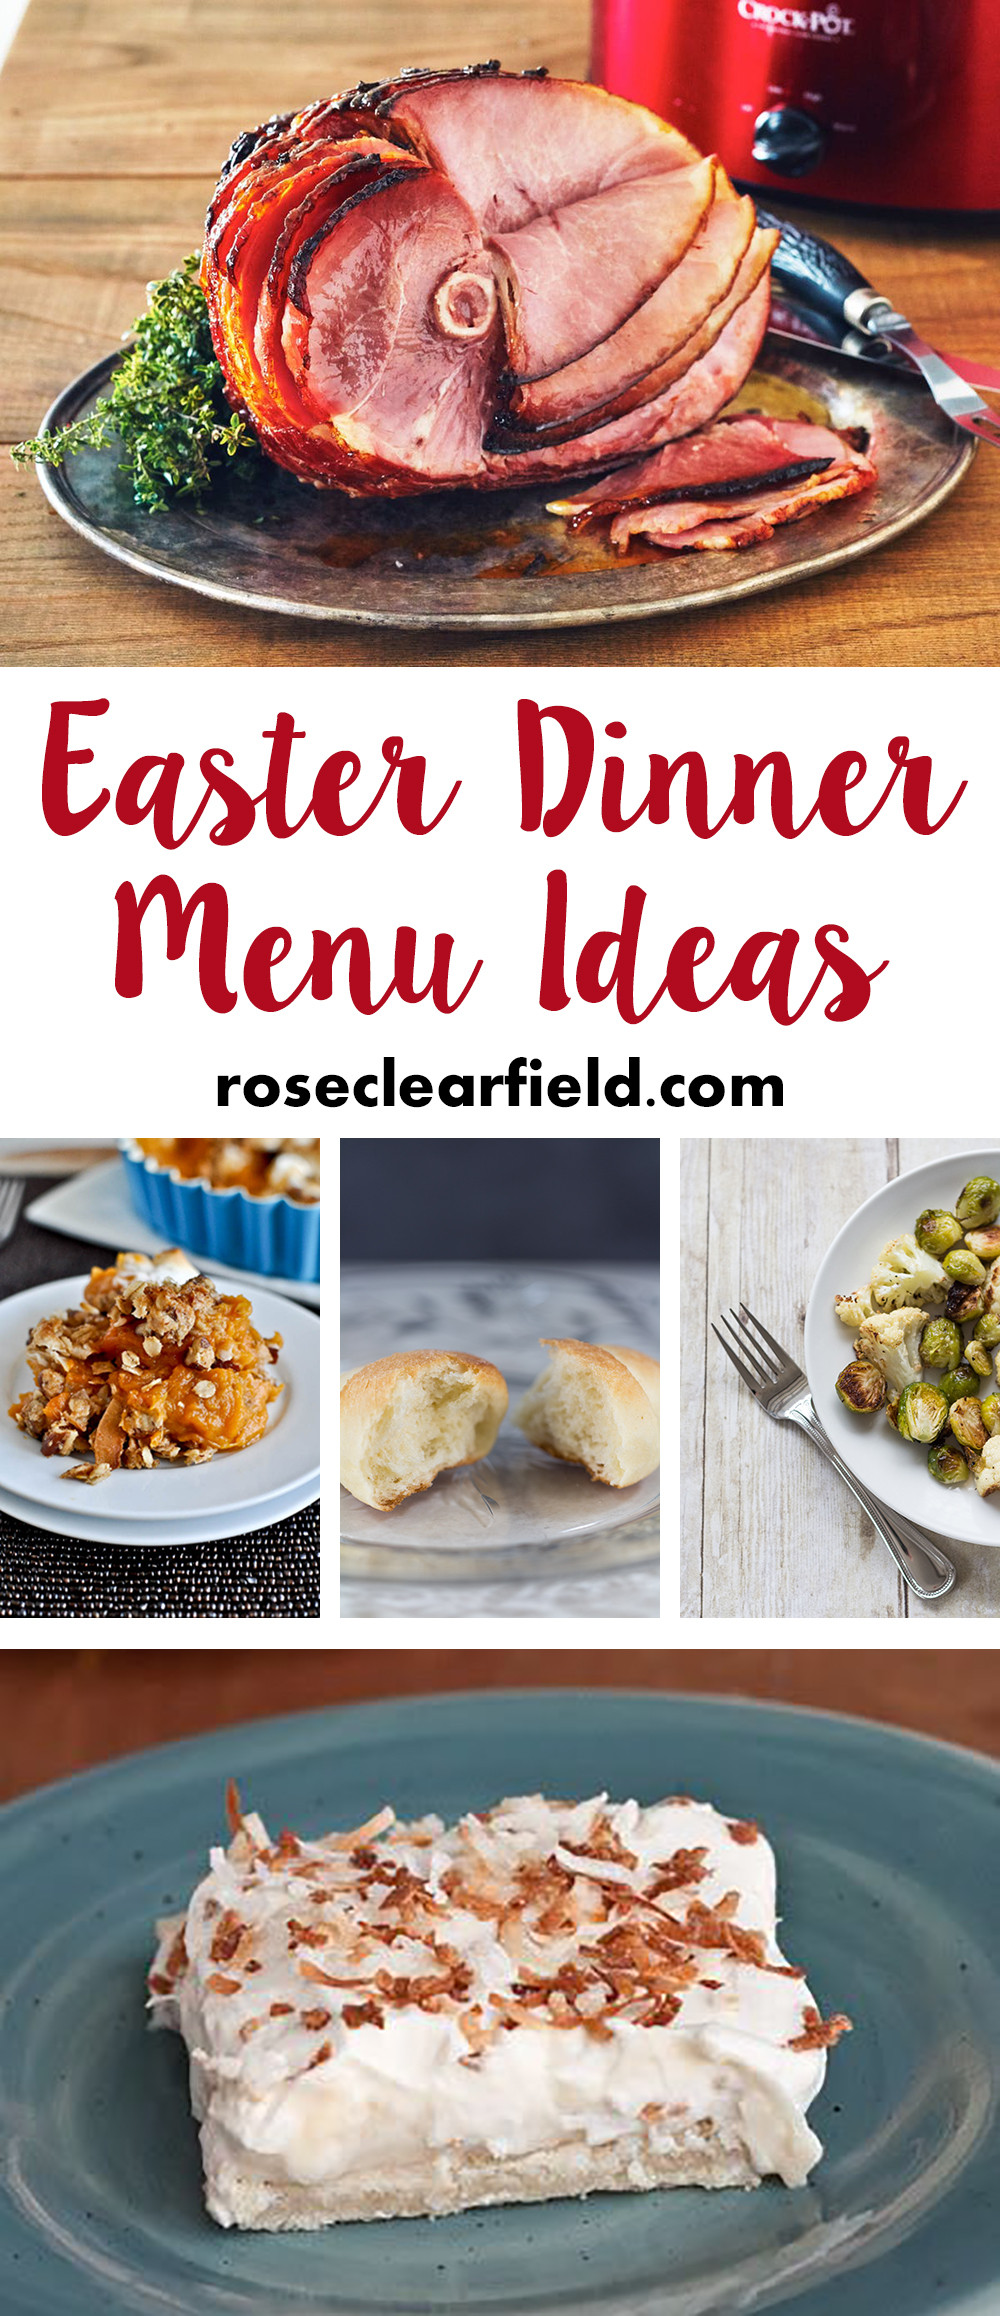 Easter Dinner Suggestions
 Easter Dinner Menu Ideas • Rose Clearfield